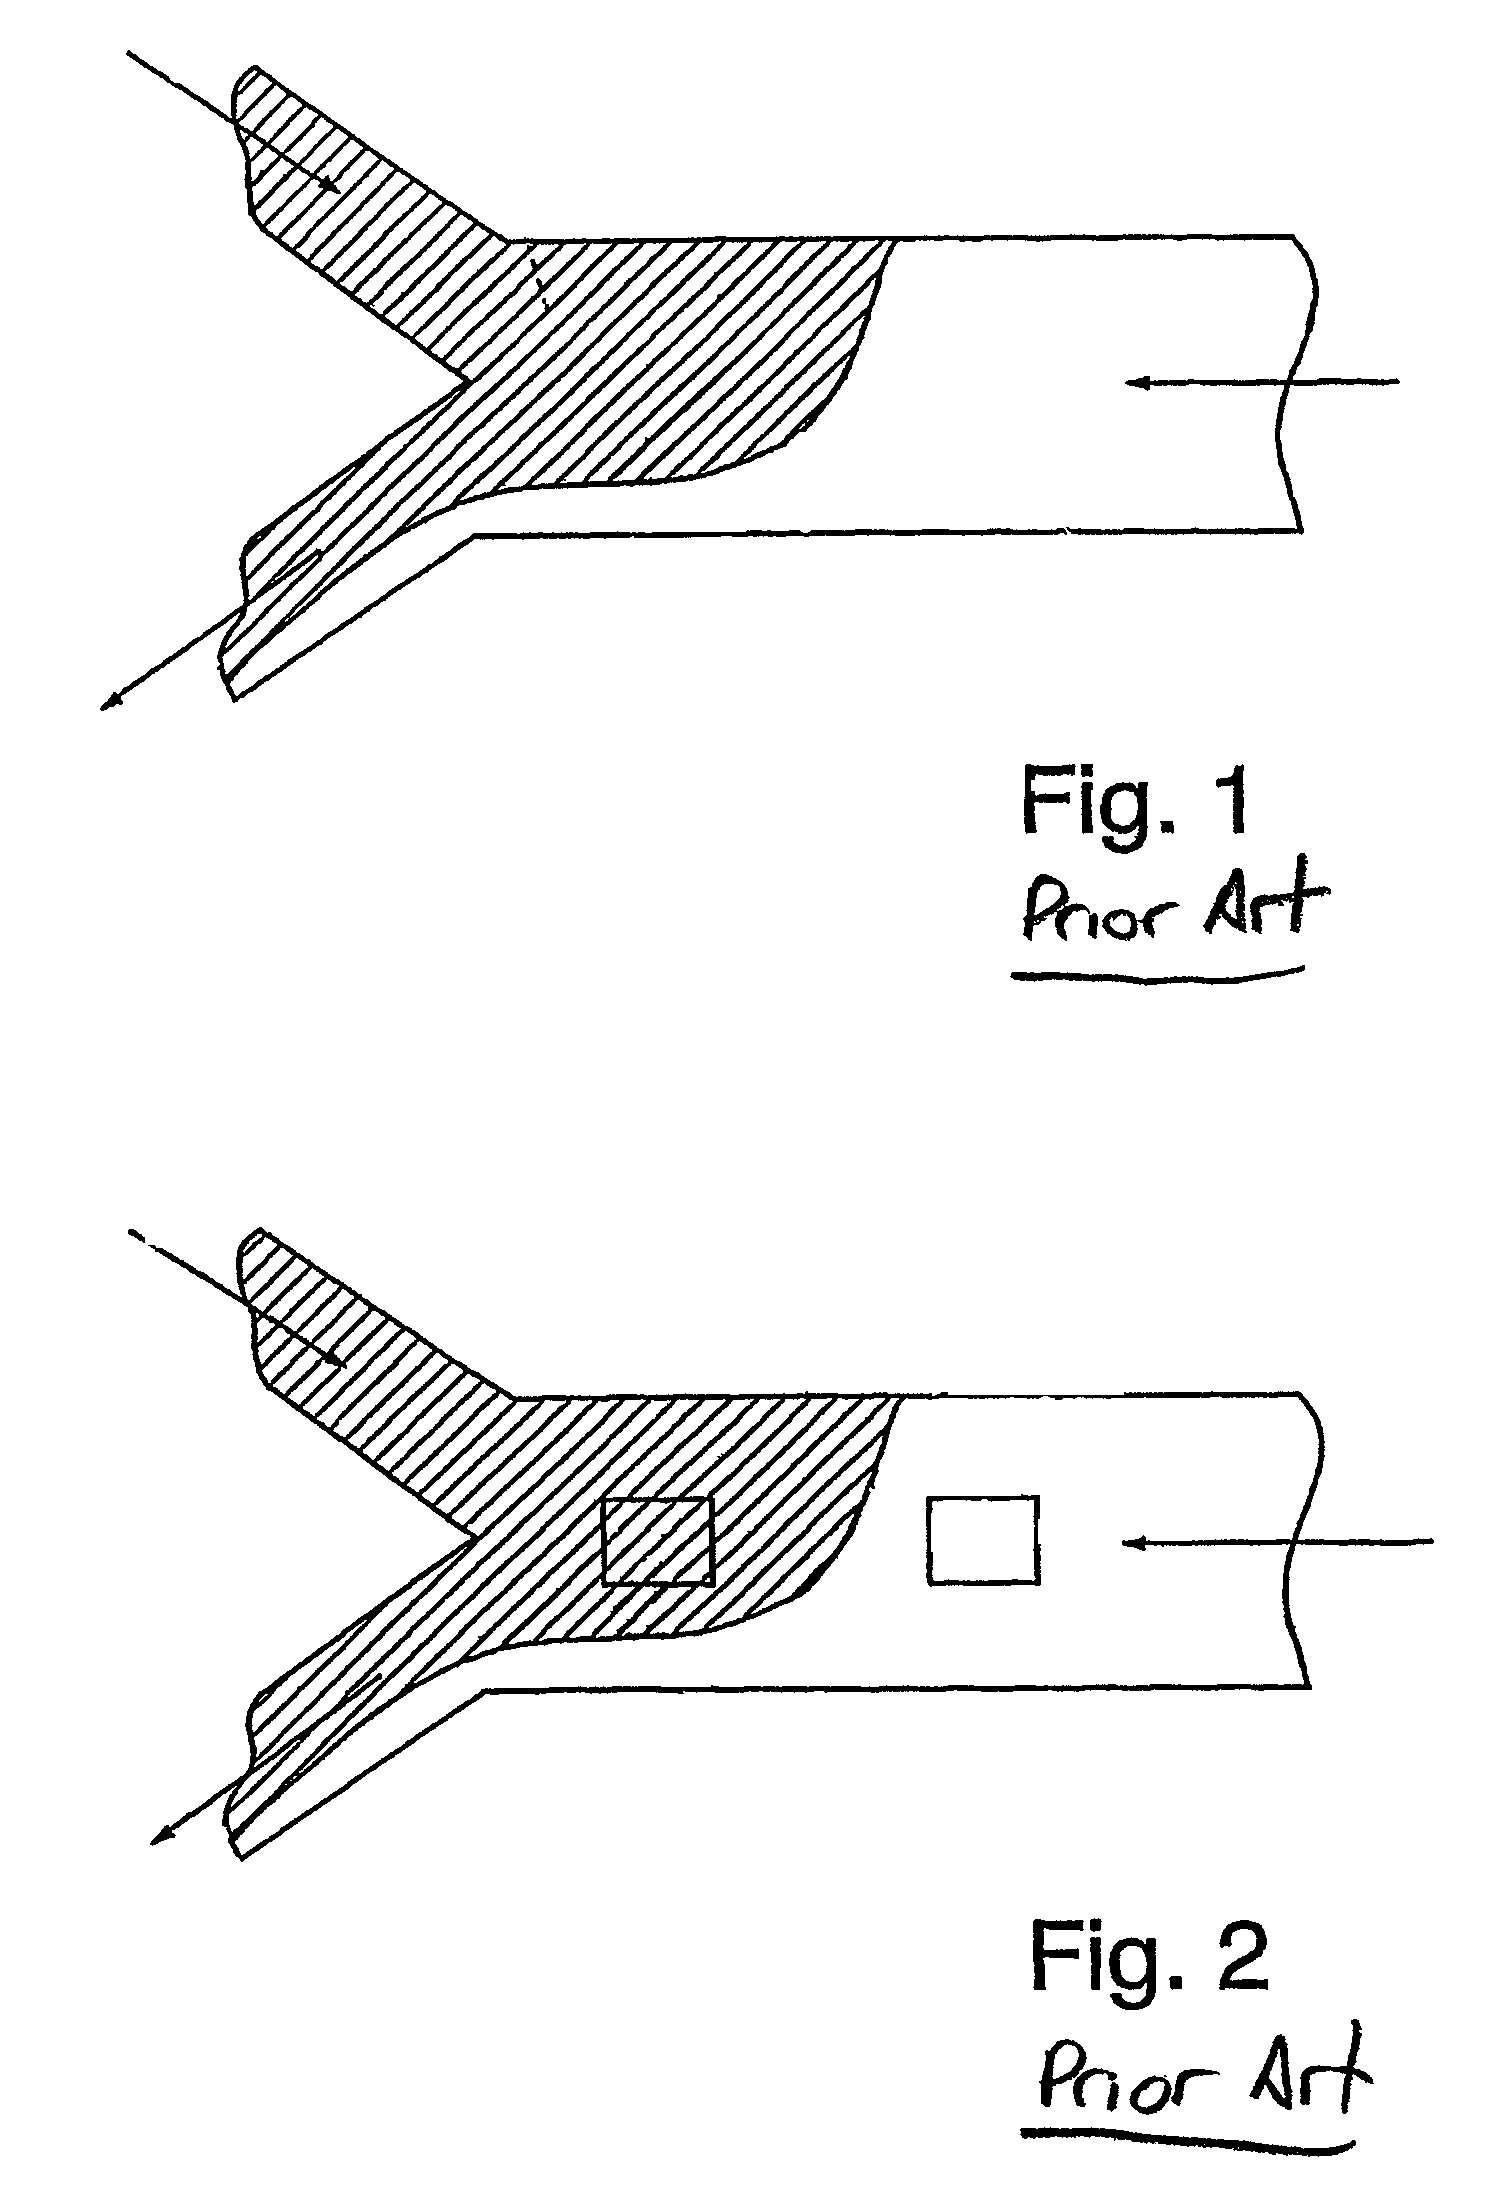 Flow cell facilitating precise delivery of reagent to a detection surface using evacuation ports and guided laminar flows, and methods of use